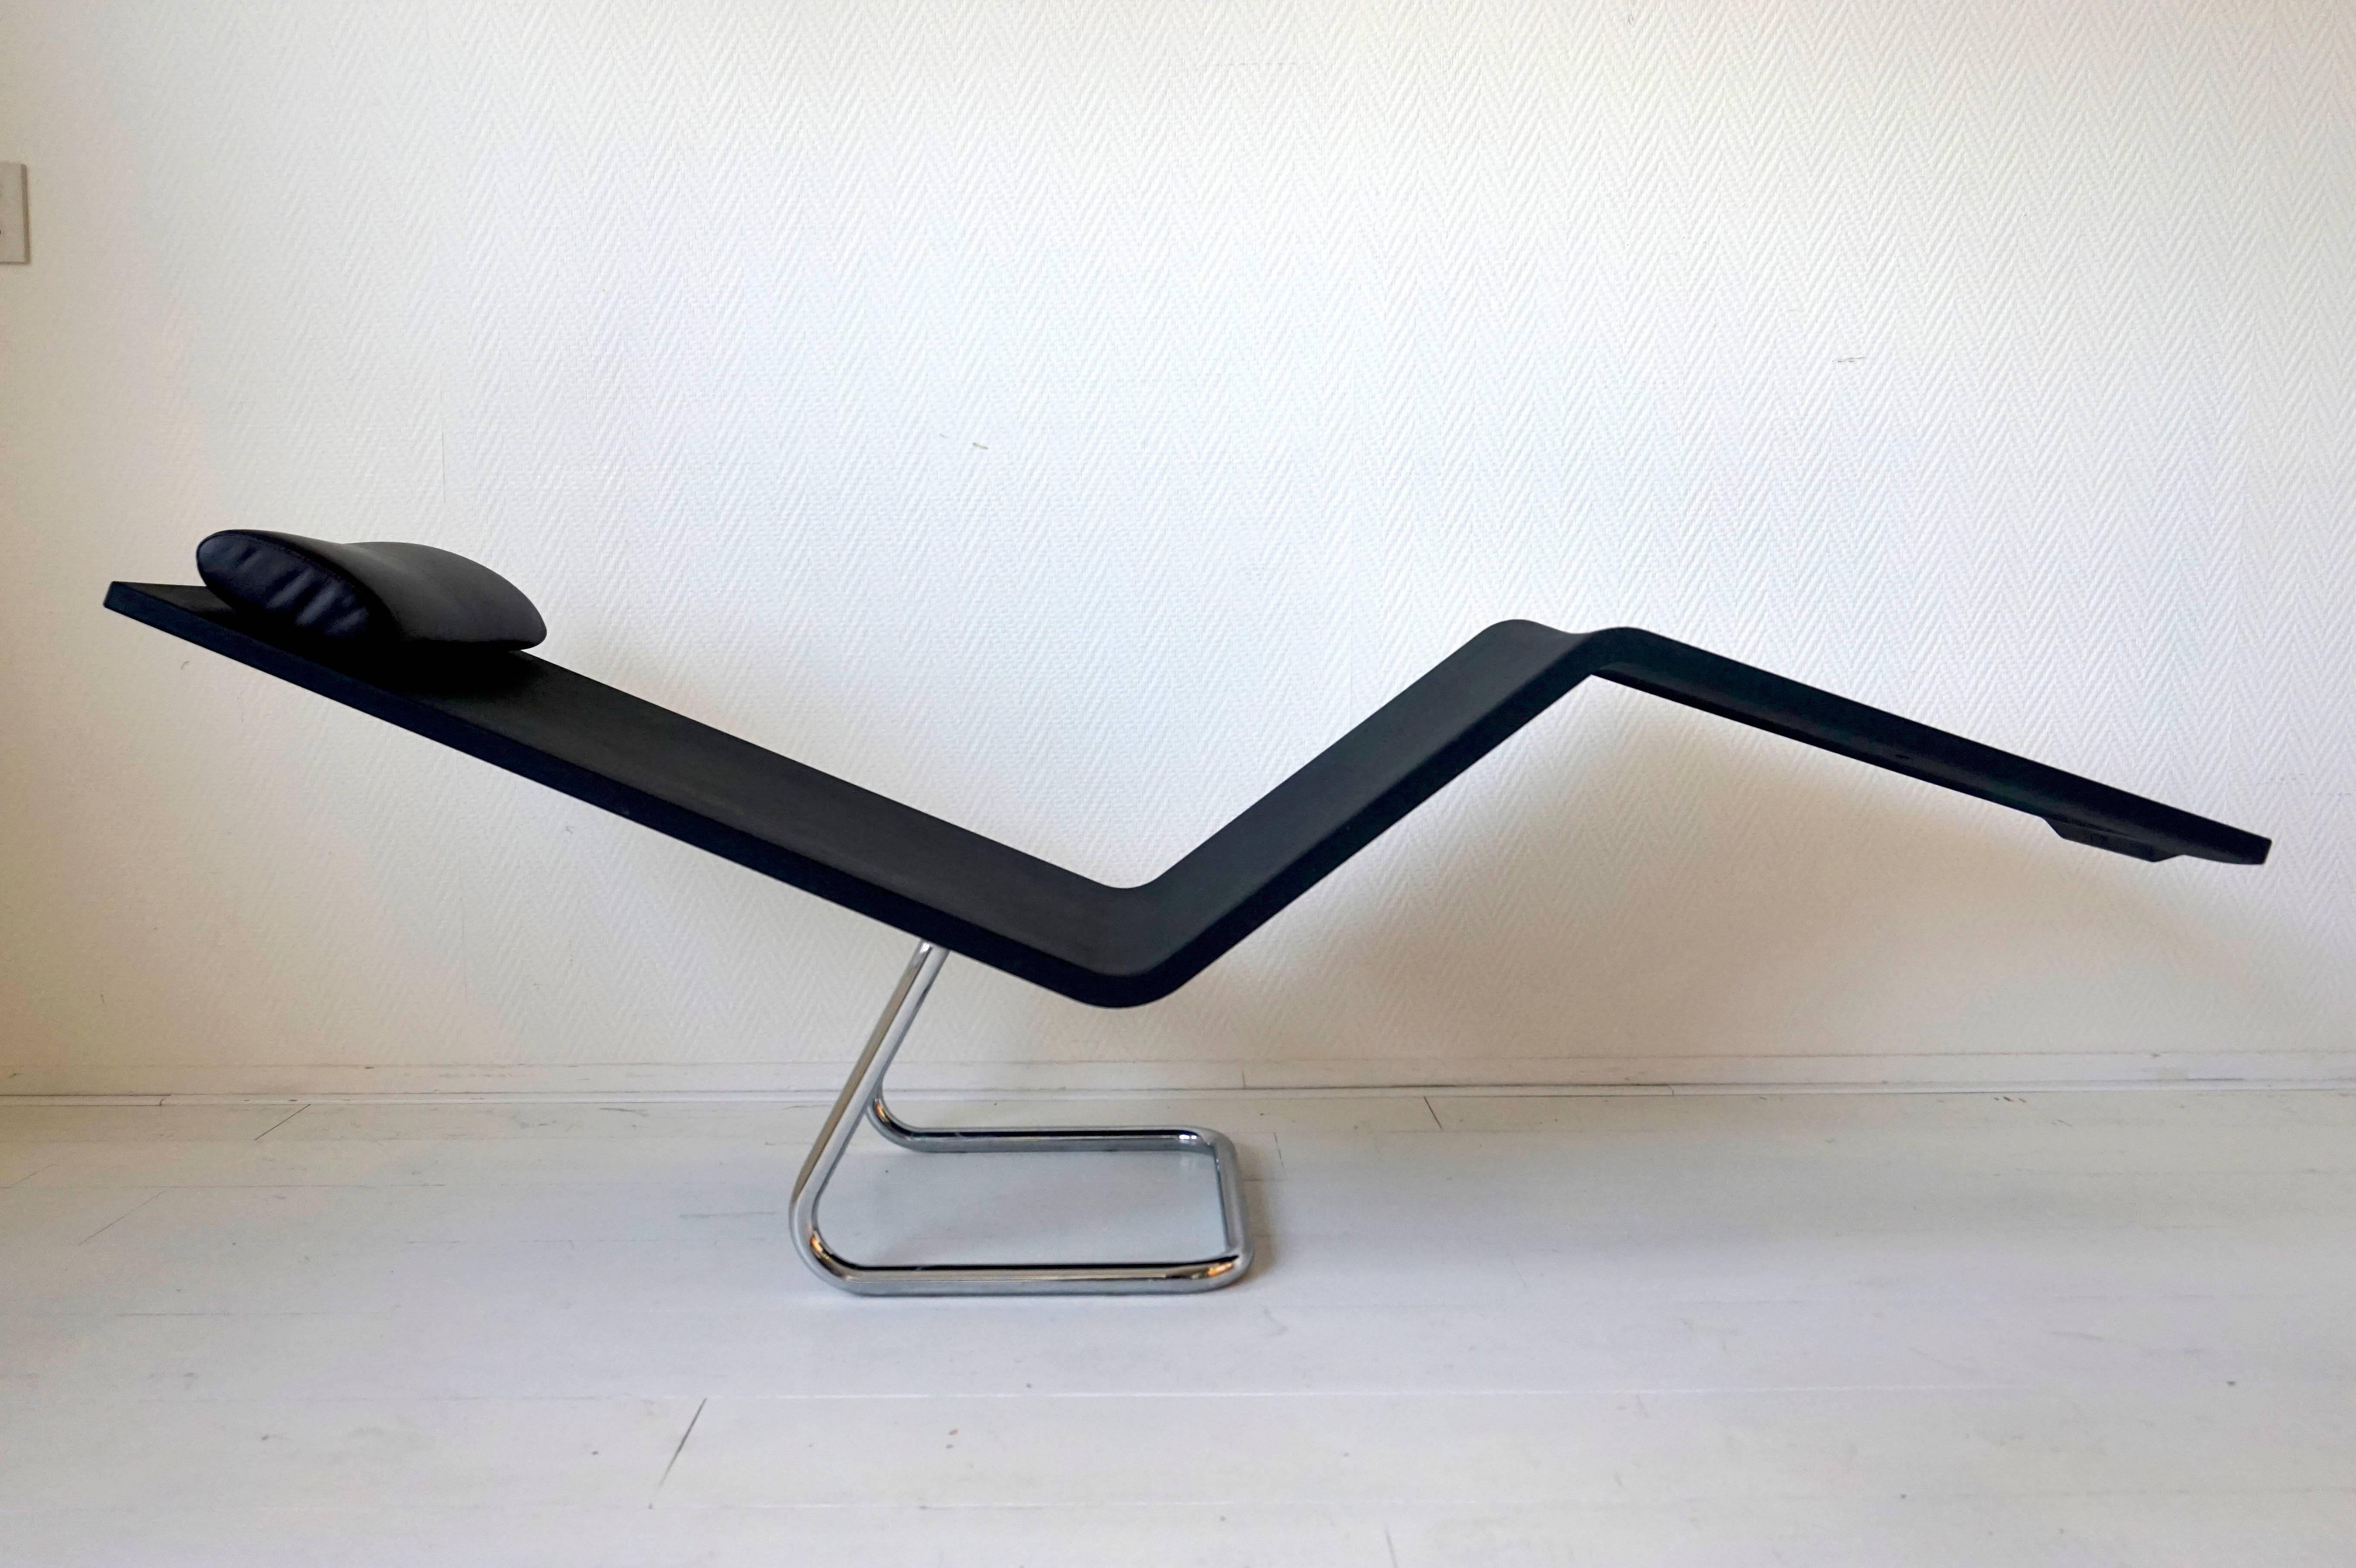 The vitra MVS chaise was designed by Maarten Van Severen and connects like no other minimalist chaise lounge design with high comfort. 

Thanks to the elastically yielding material the simple, rectangular Vitra lounger offers extraordinary levels